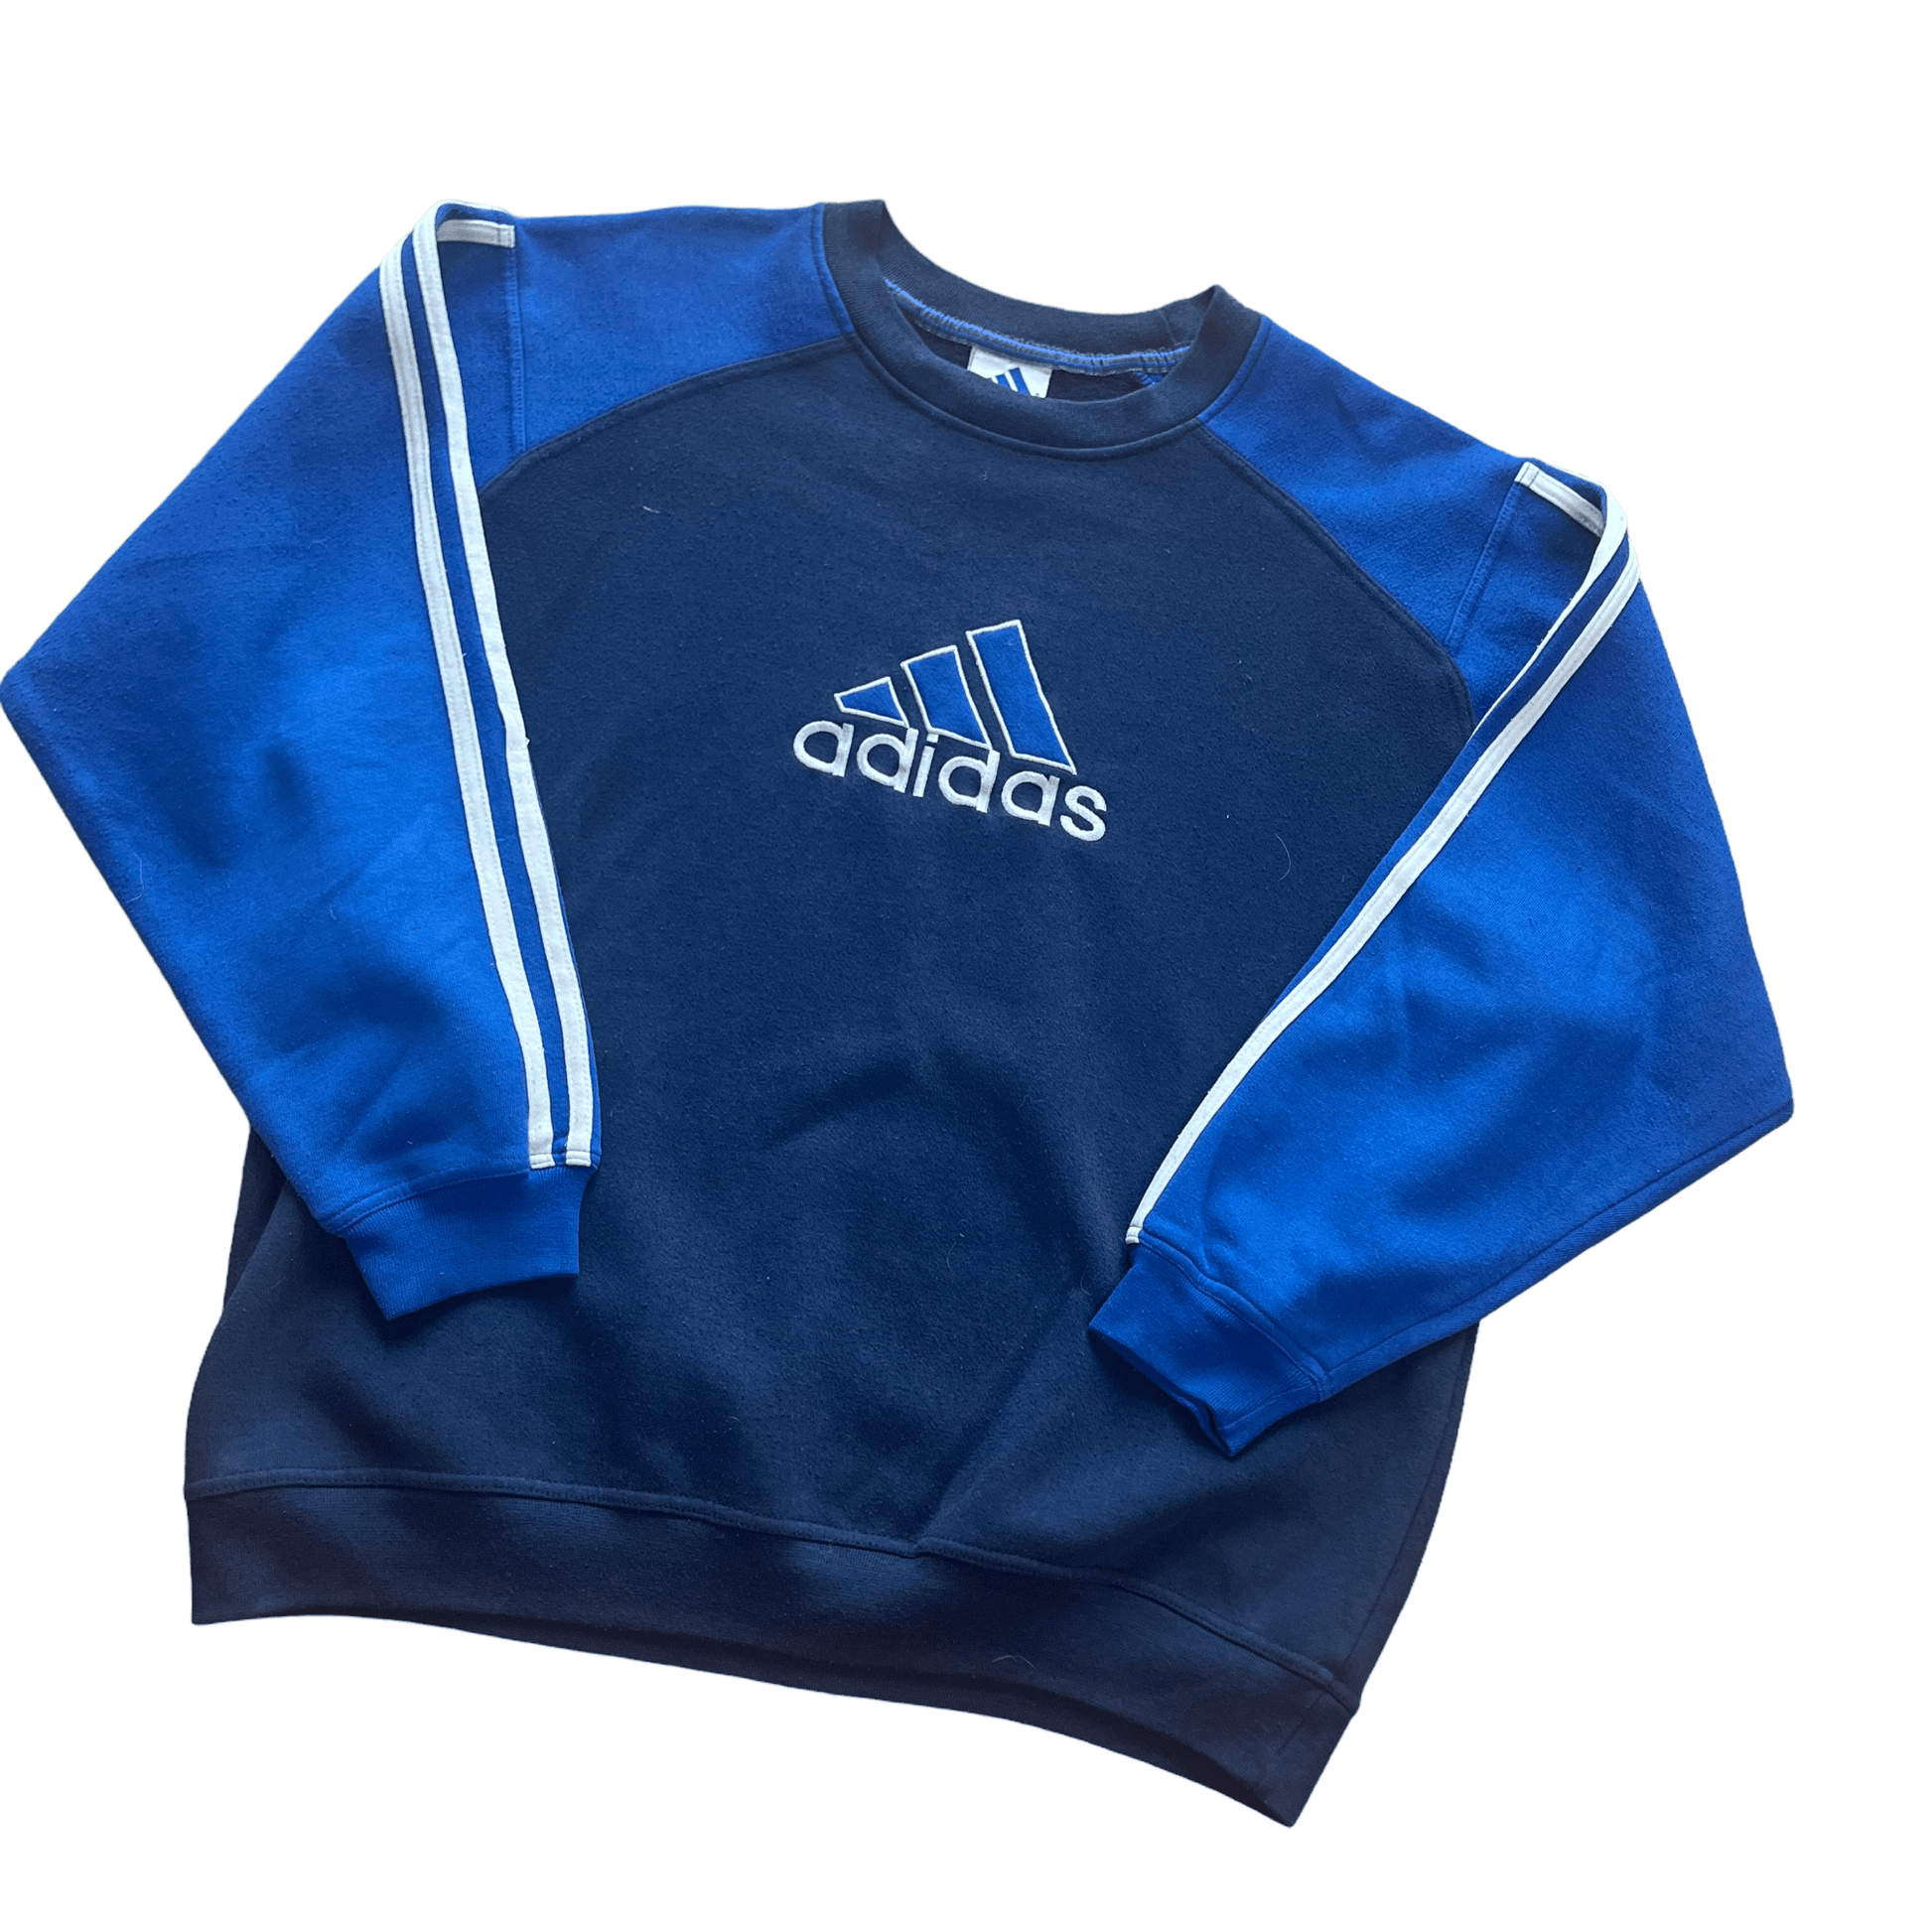 Vintage 90s Navy Blue Adidas Spell-Out Sweatshirt - Extra Large - The Streetwear Studio